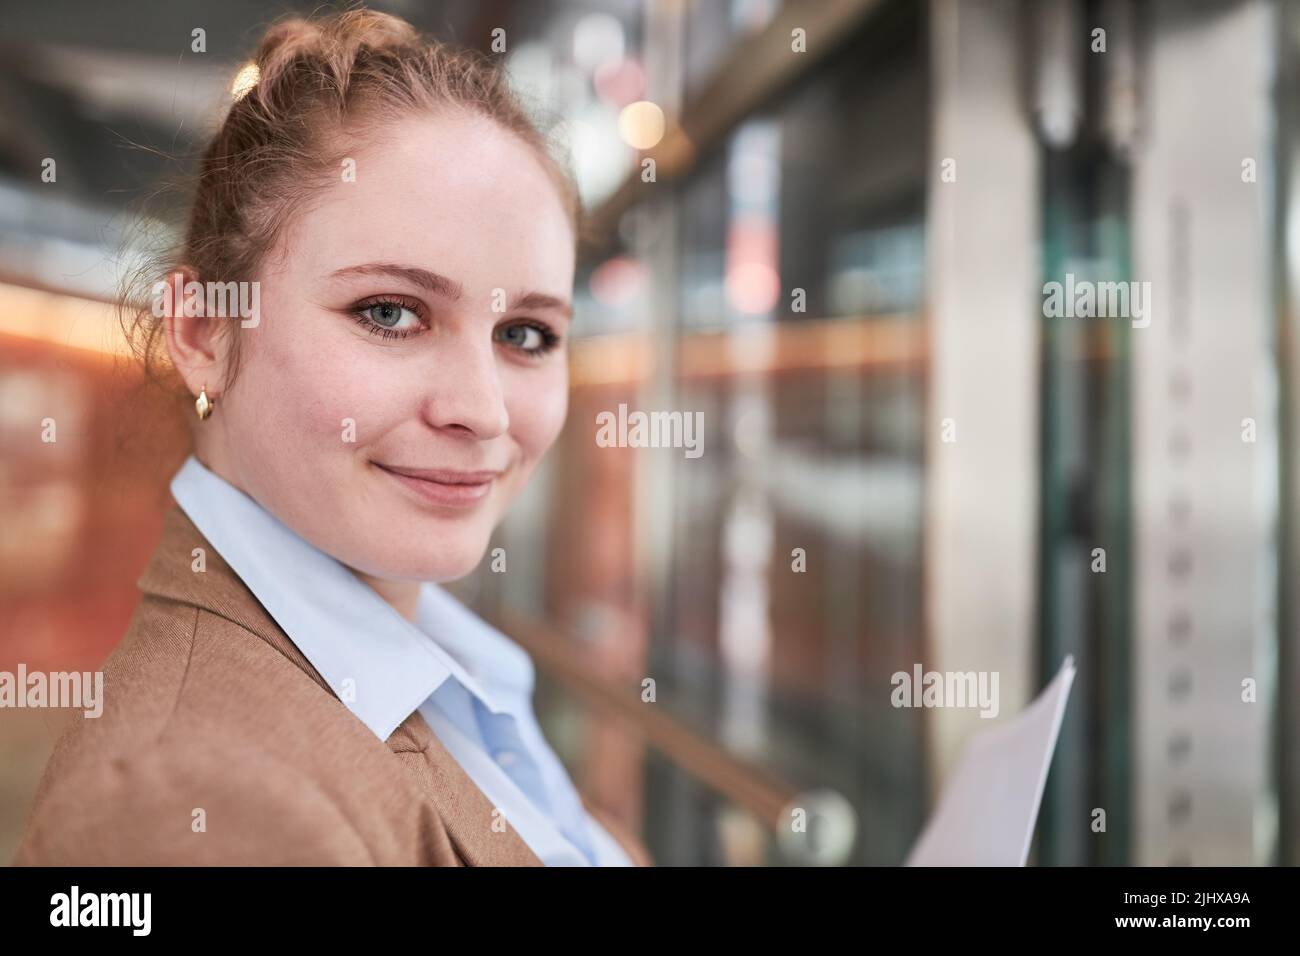 Smiling young woman as a business trainee or student Stock Photo